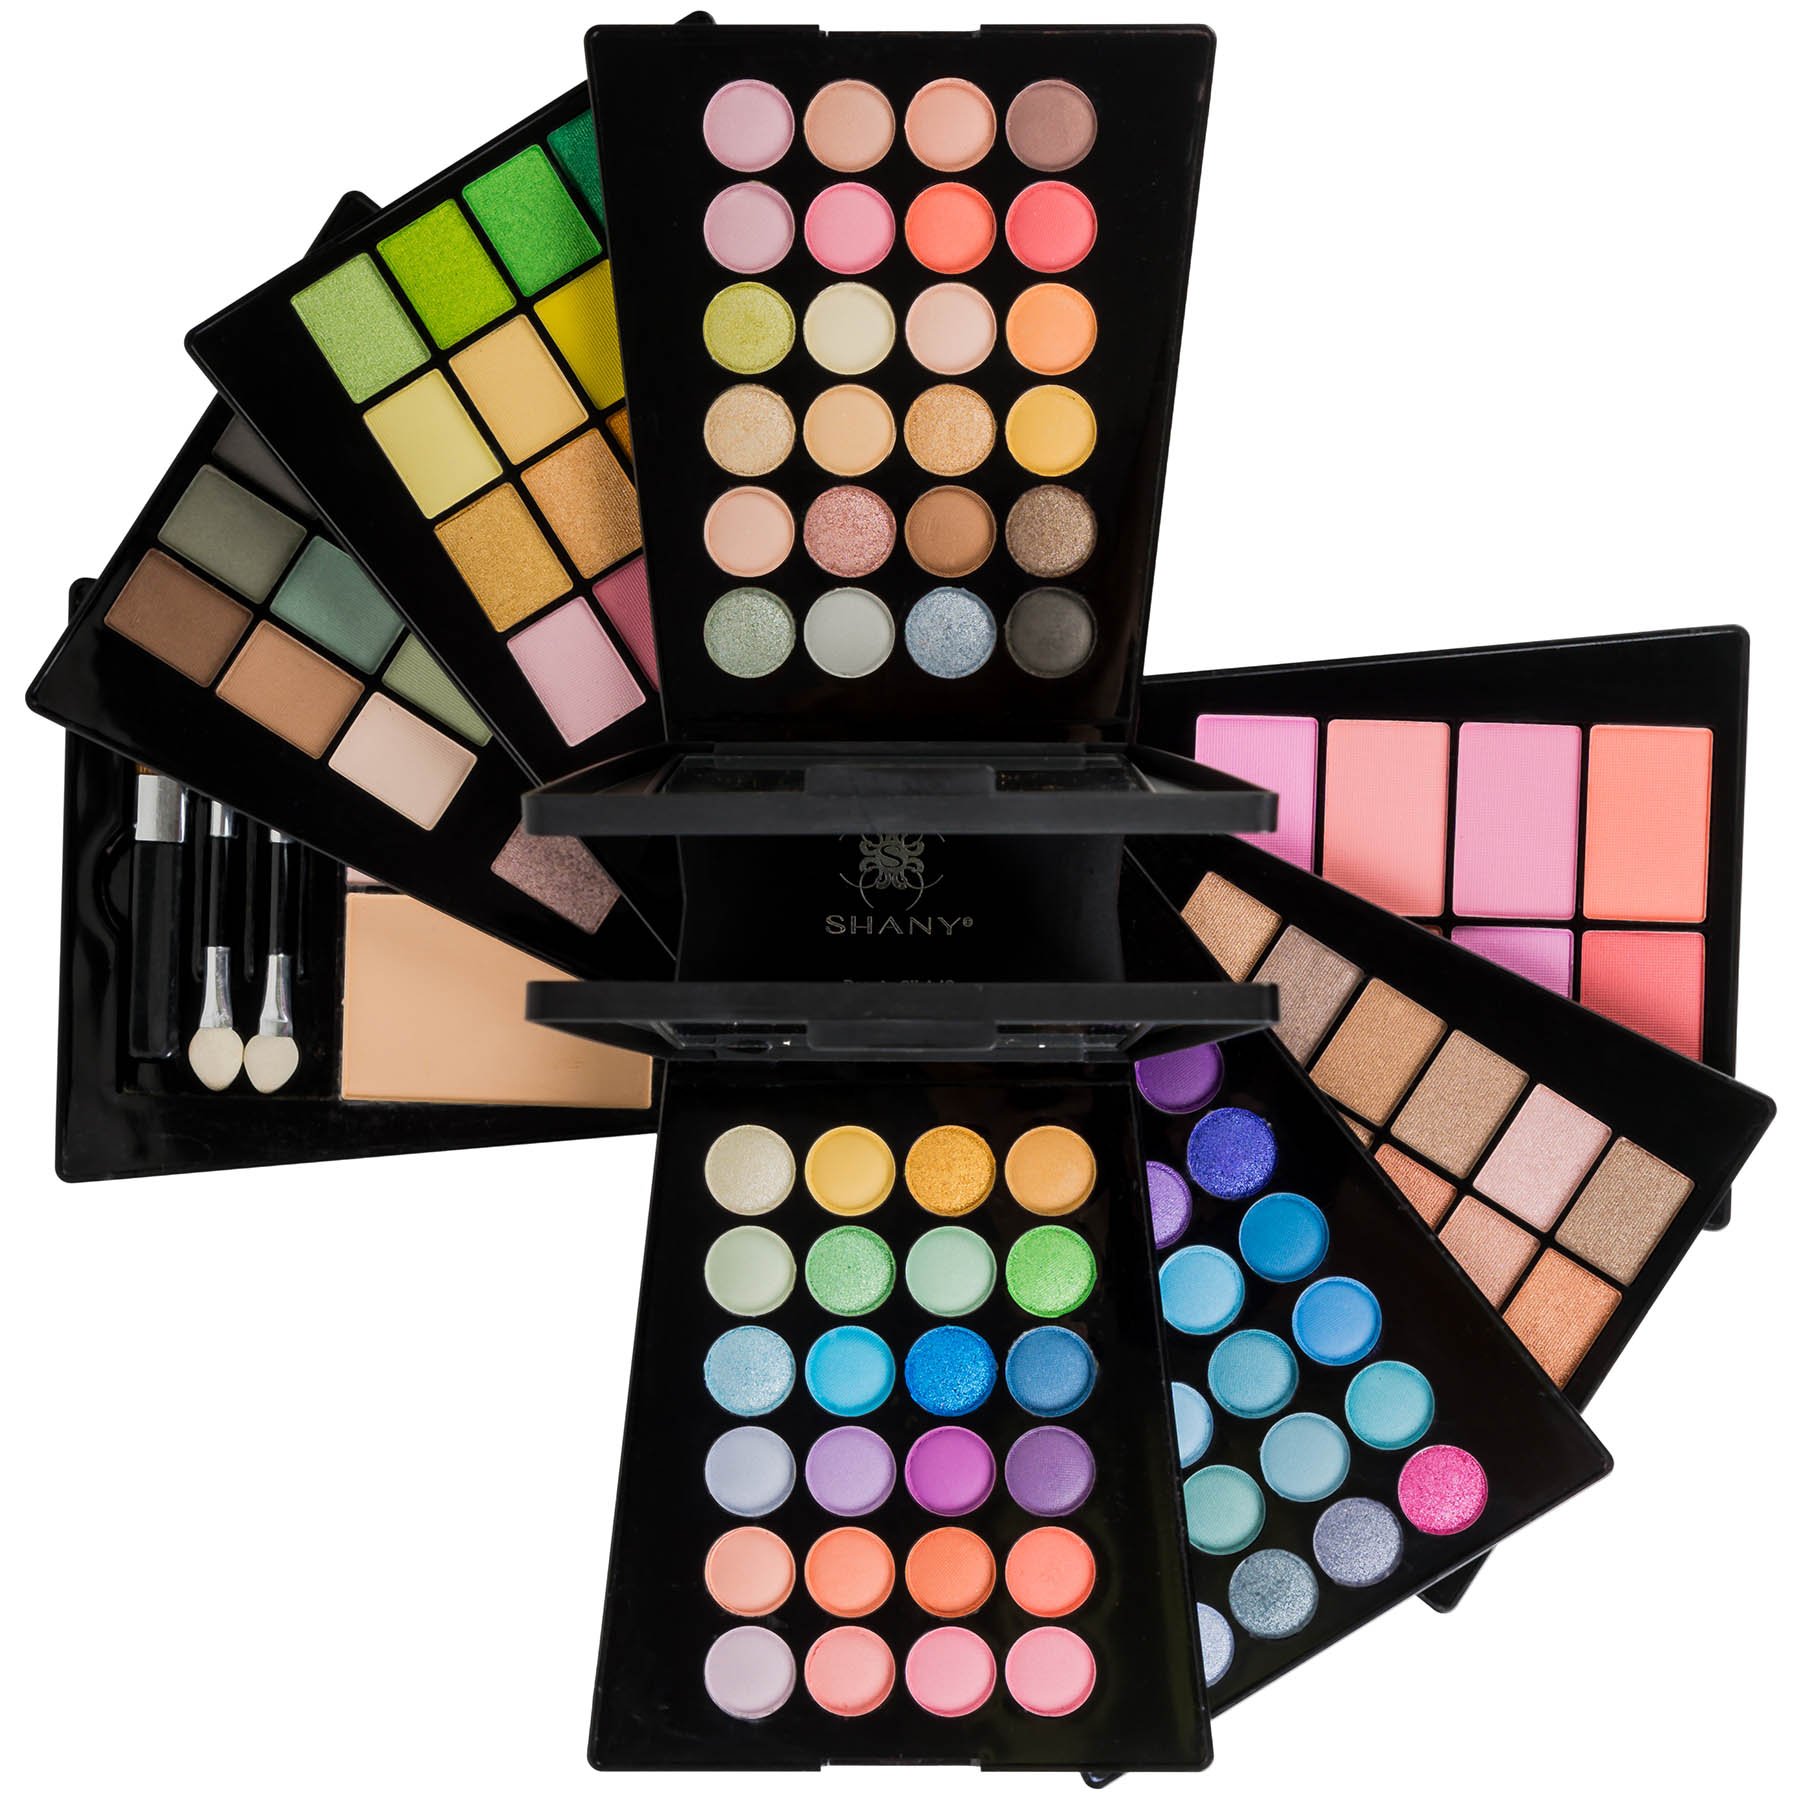 The SHANY Beauty Cliche - Makeup Palette - All-in-One Makeup Set with Eyeshadows, Face Powders, and Blushes